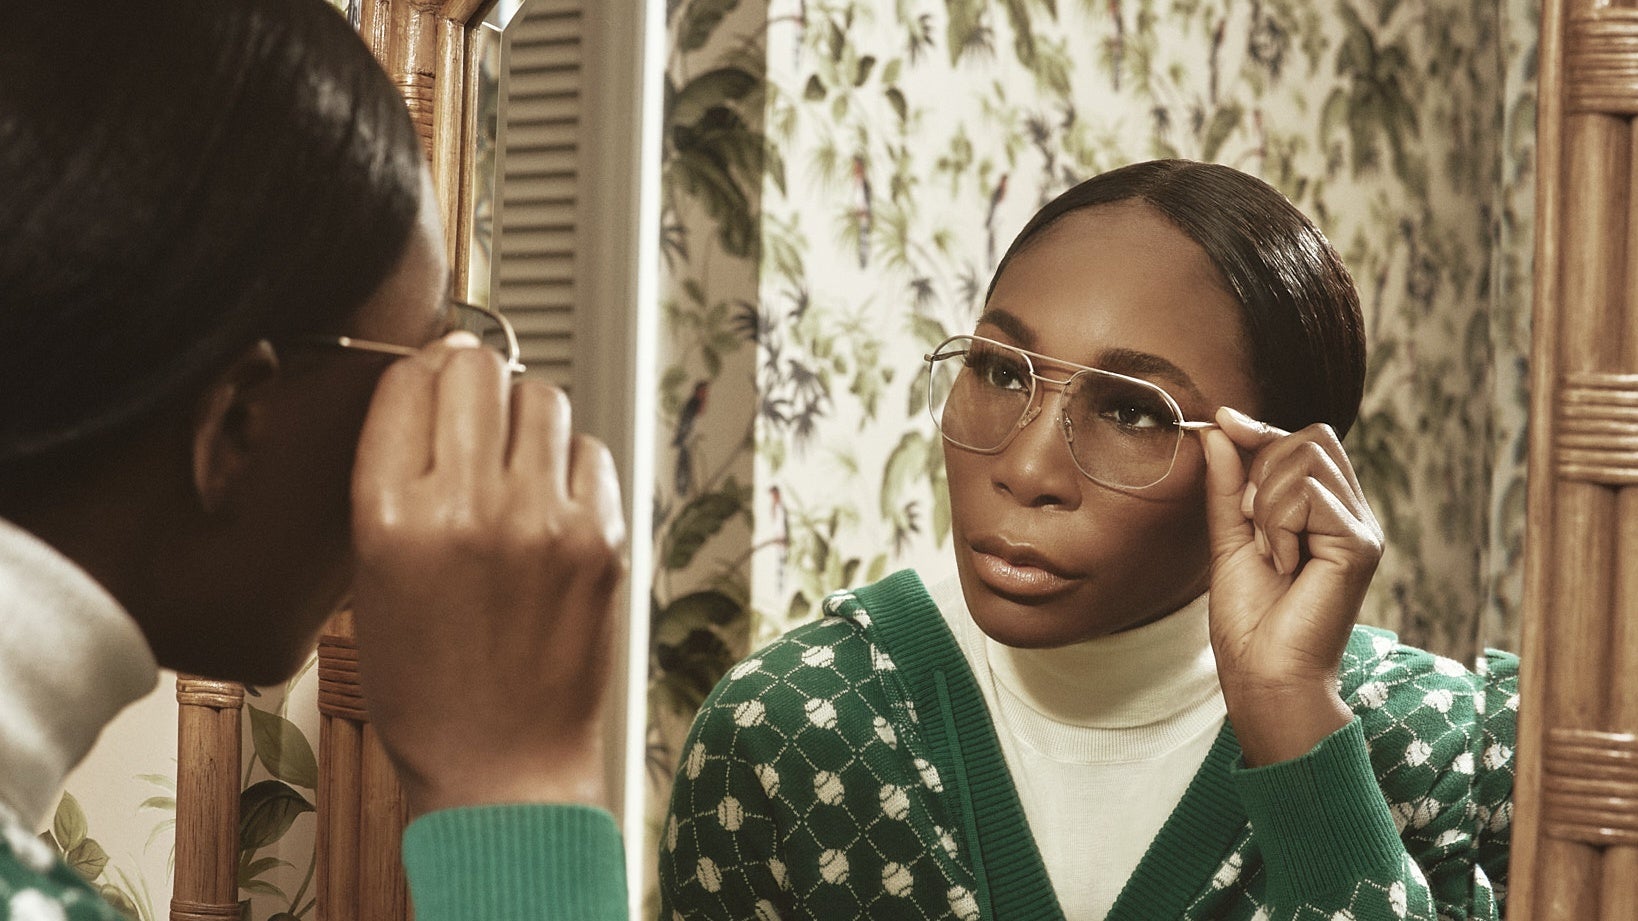 EleVen By Venus Williams And LOOK Optic Team Up To Present A New Eyewear Collection